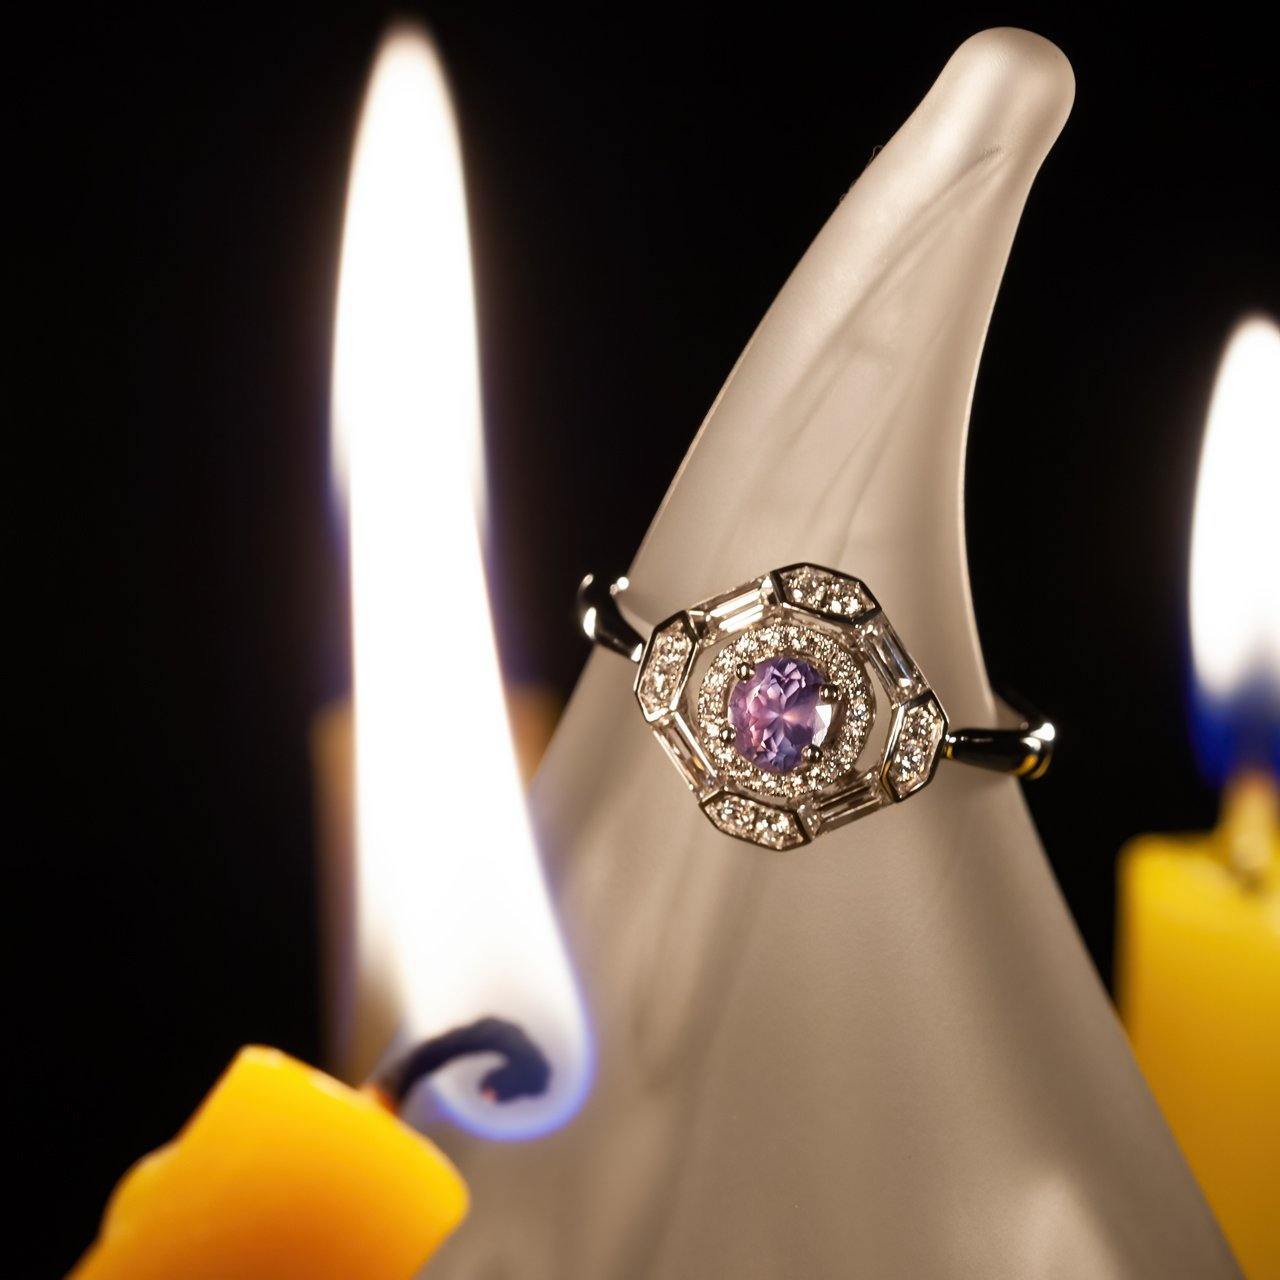 The 0.60ct natural alexandrite ring on a candle, showing its color-change property